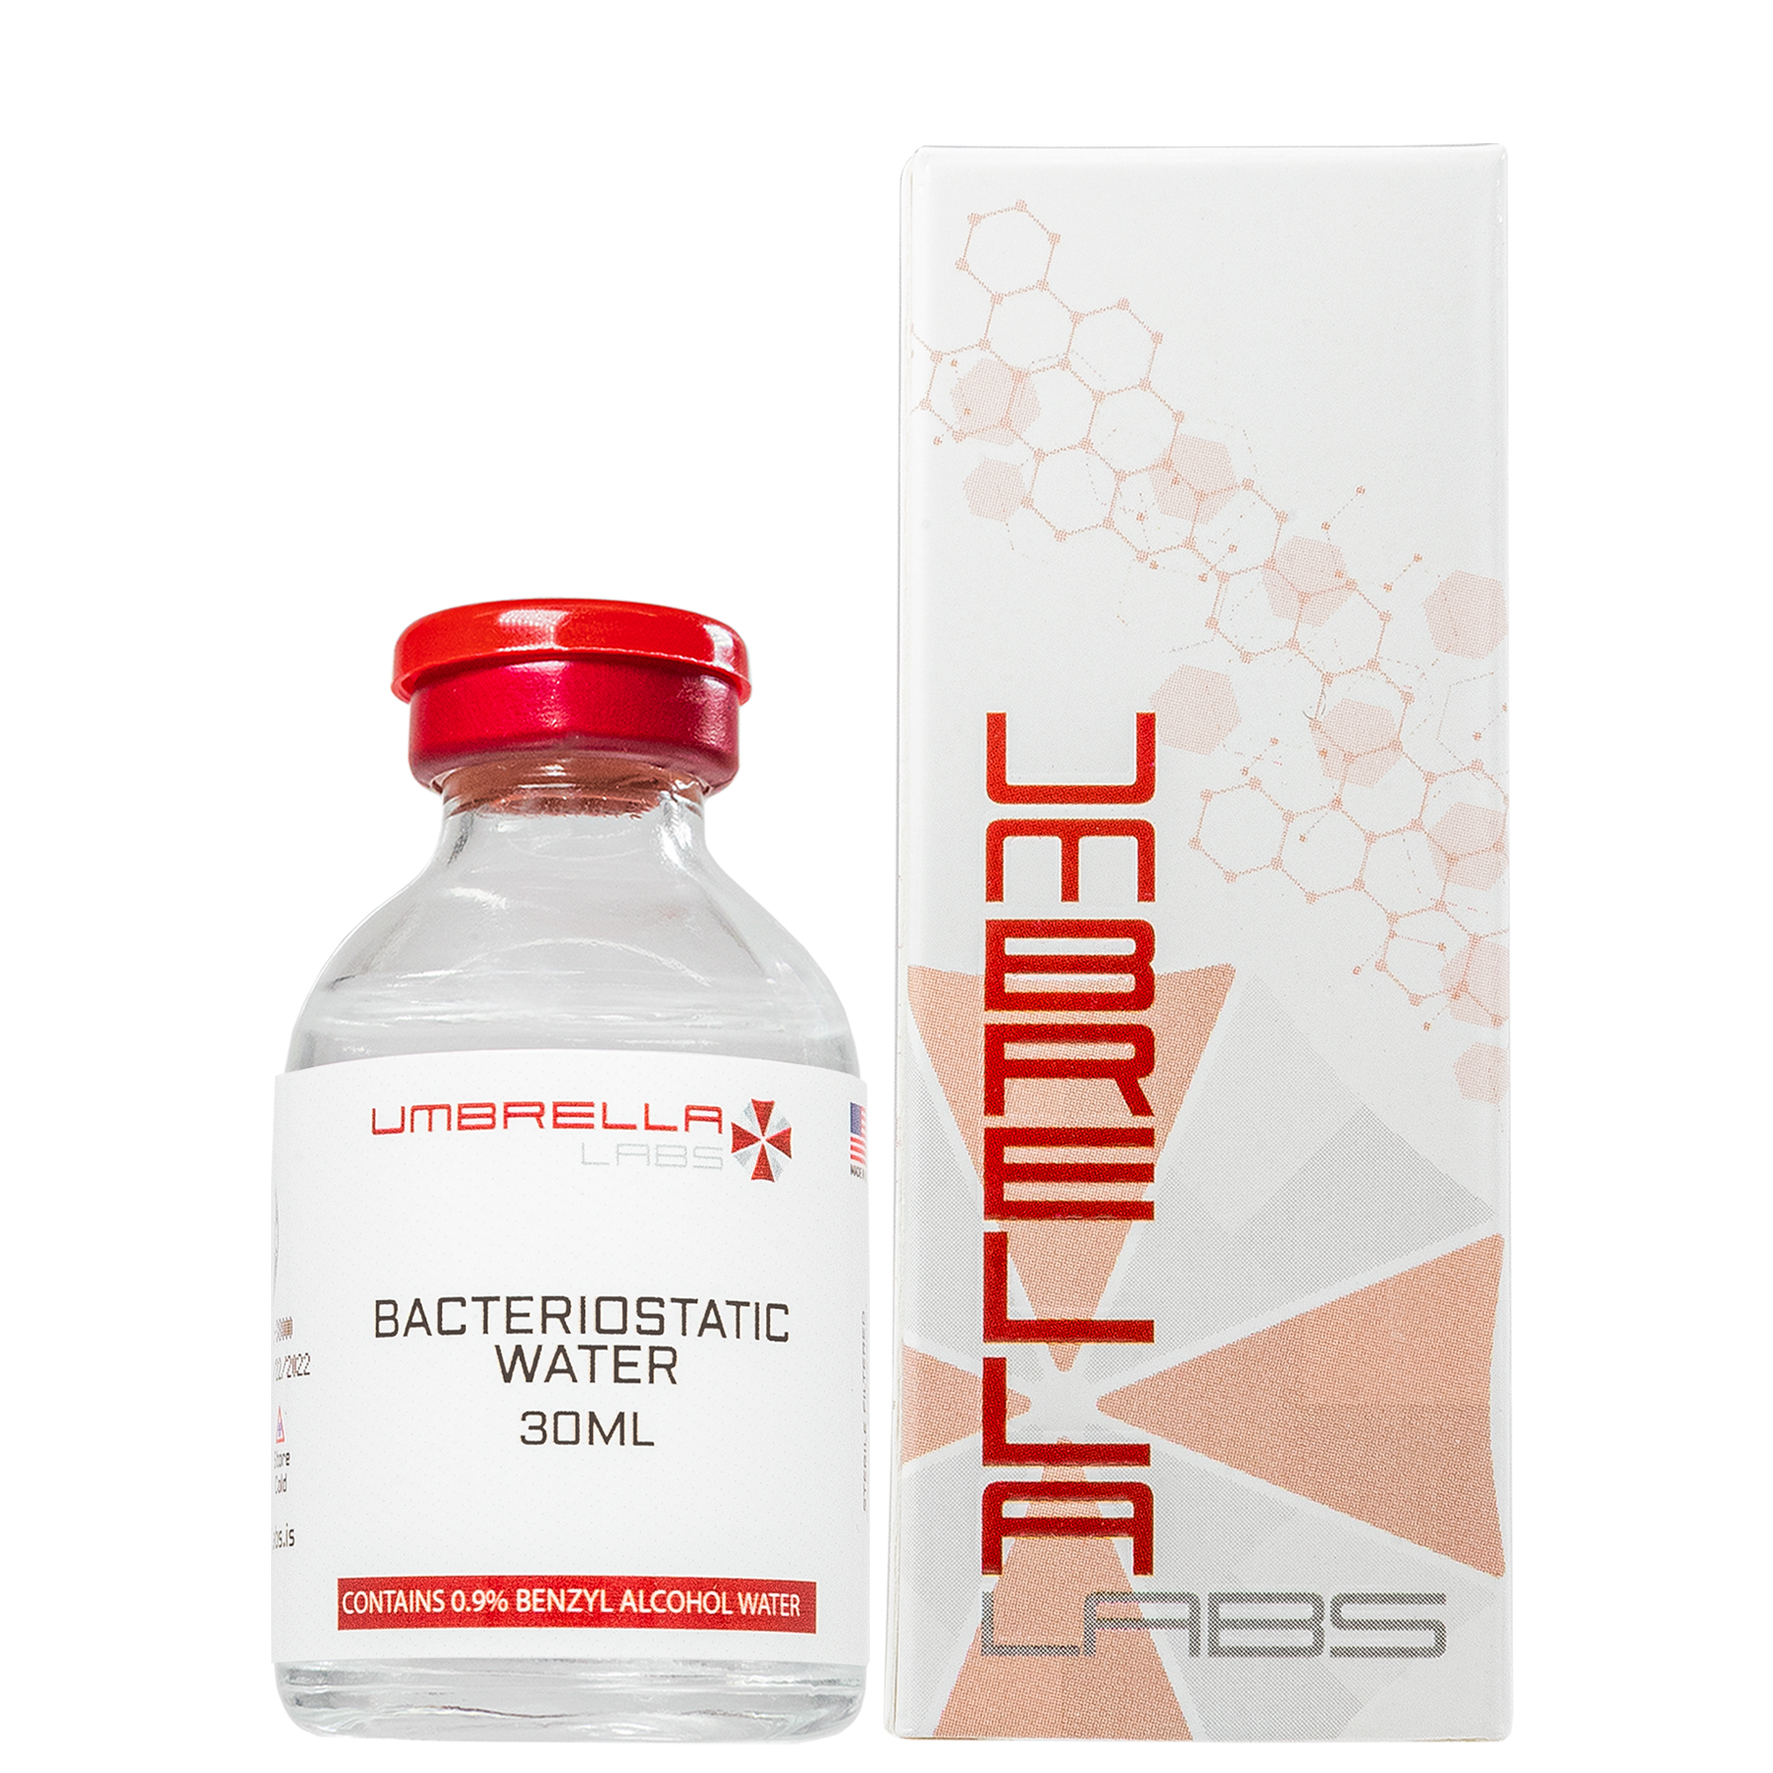 bacteriostatic water 30ml bottle for peptides